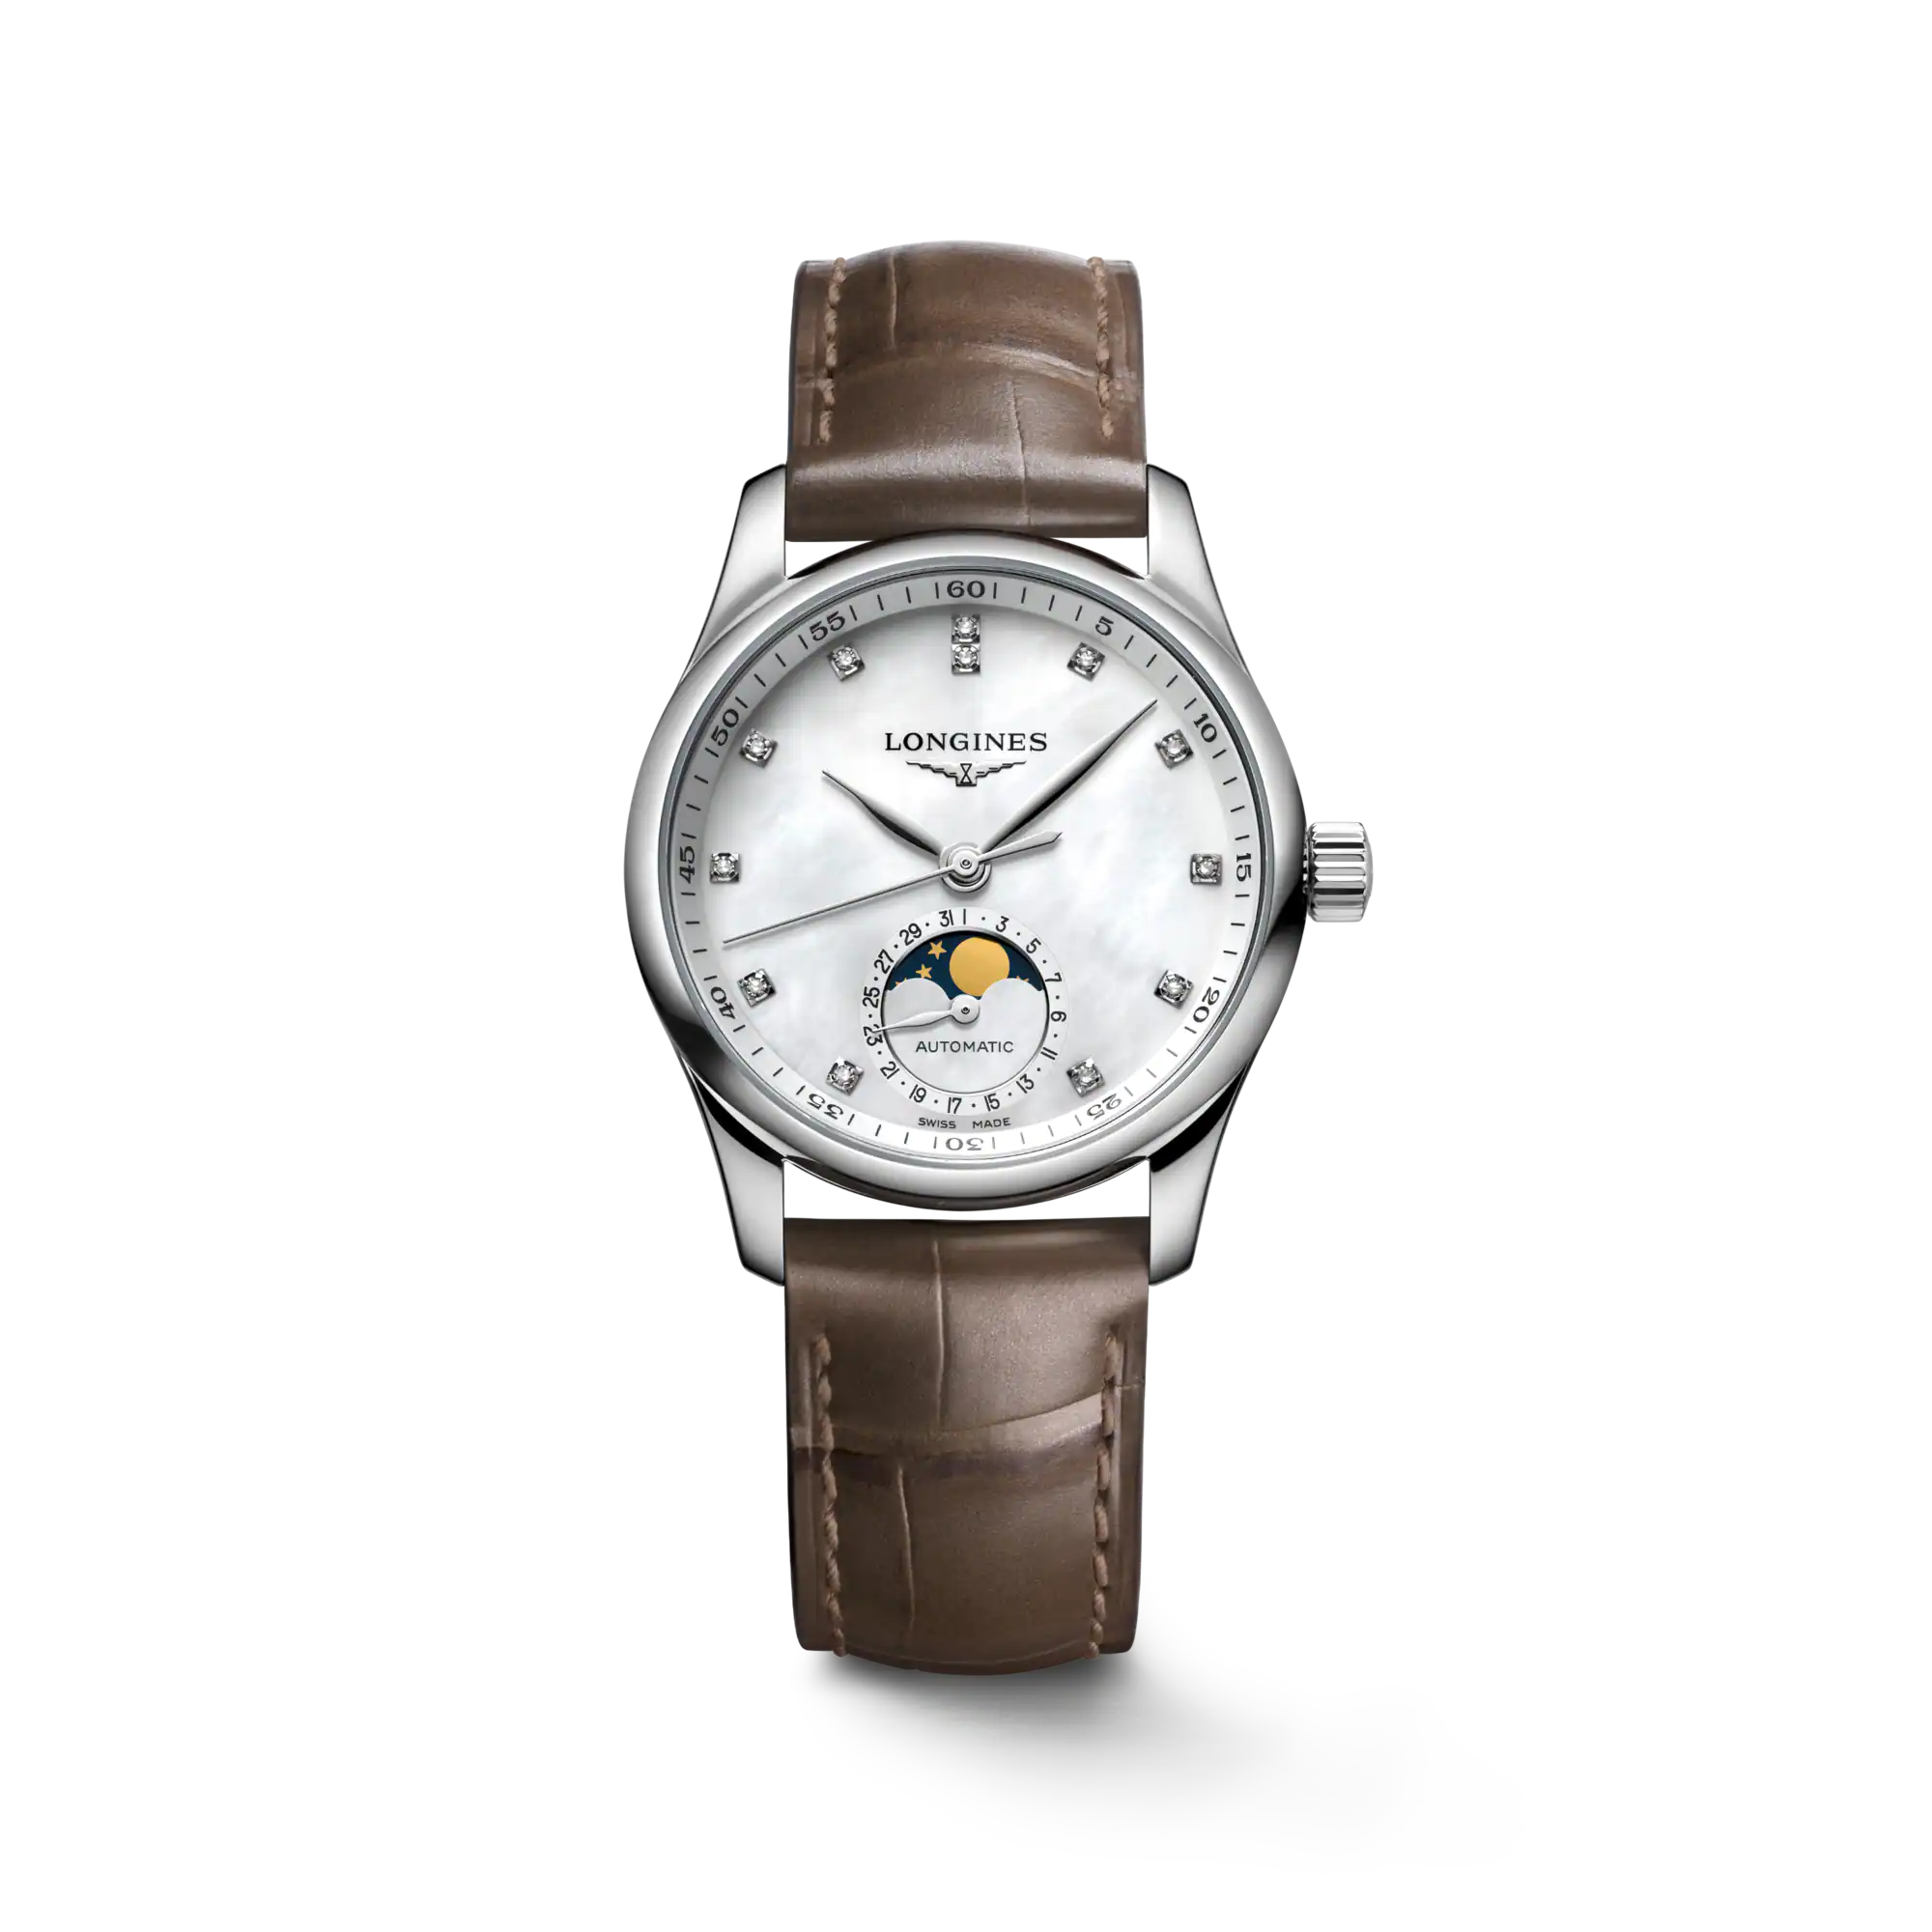 The Longines Master Collection Automatic Women's Watch L24094874